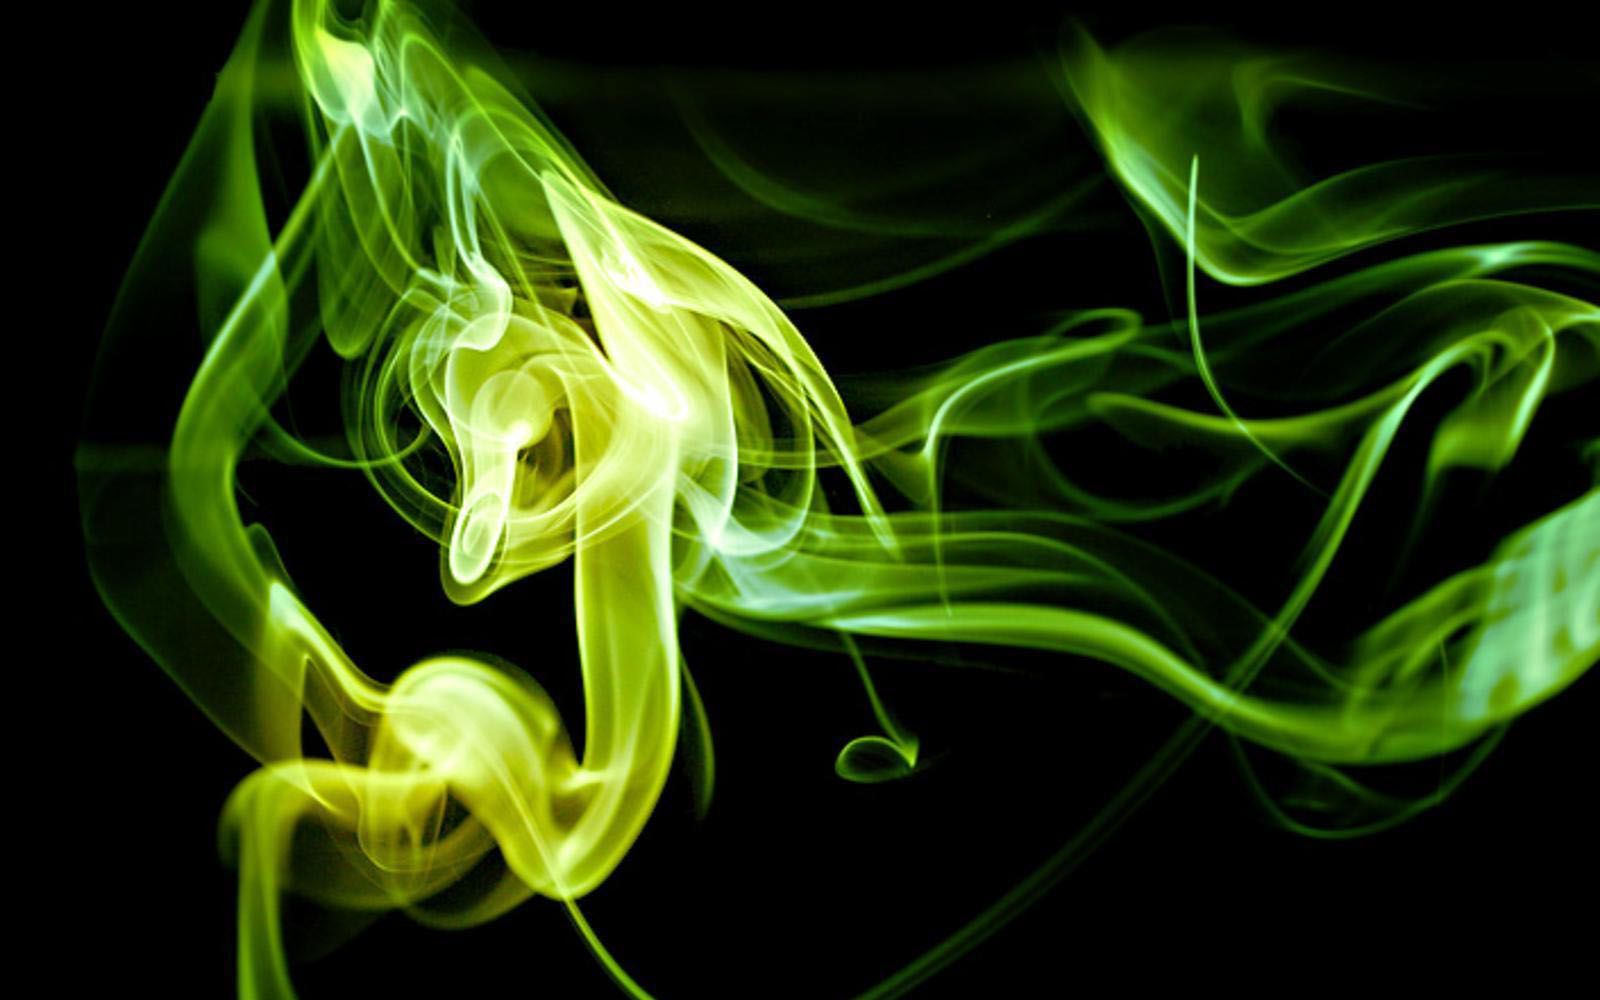 Green Smoke Background Images HD Pictures and Wallpaper For Free Download   Pngtree